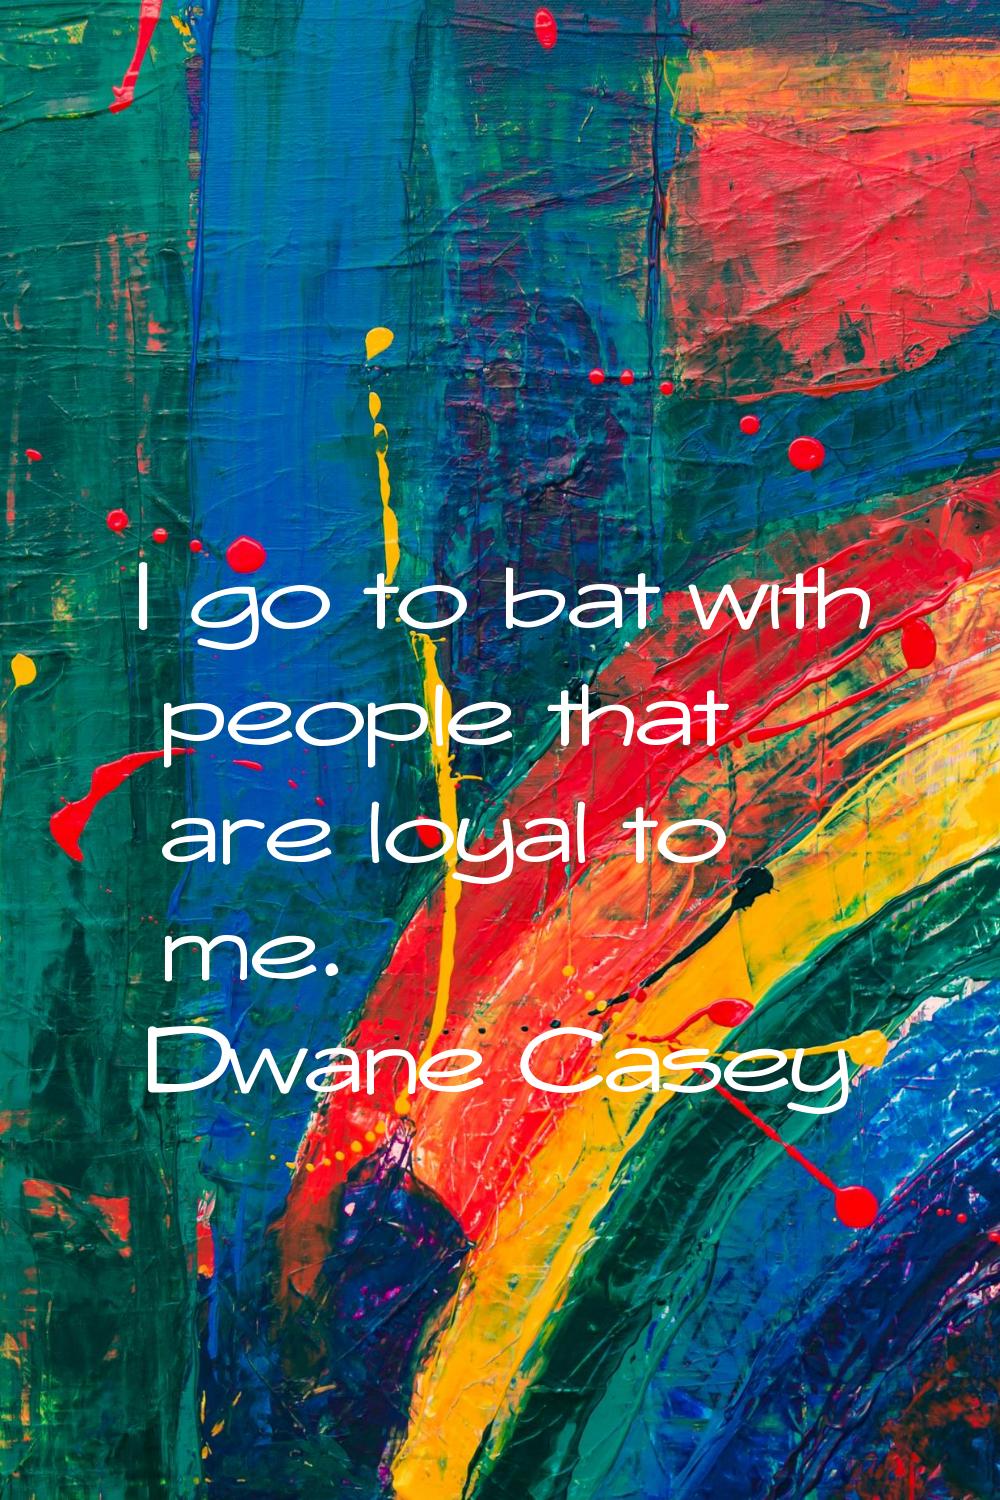 I go to bat with people that are loyal to me.